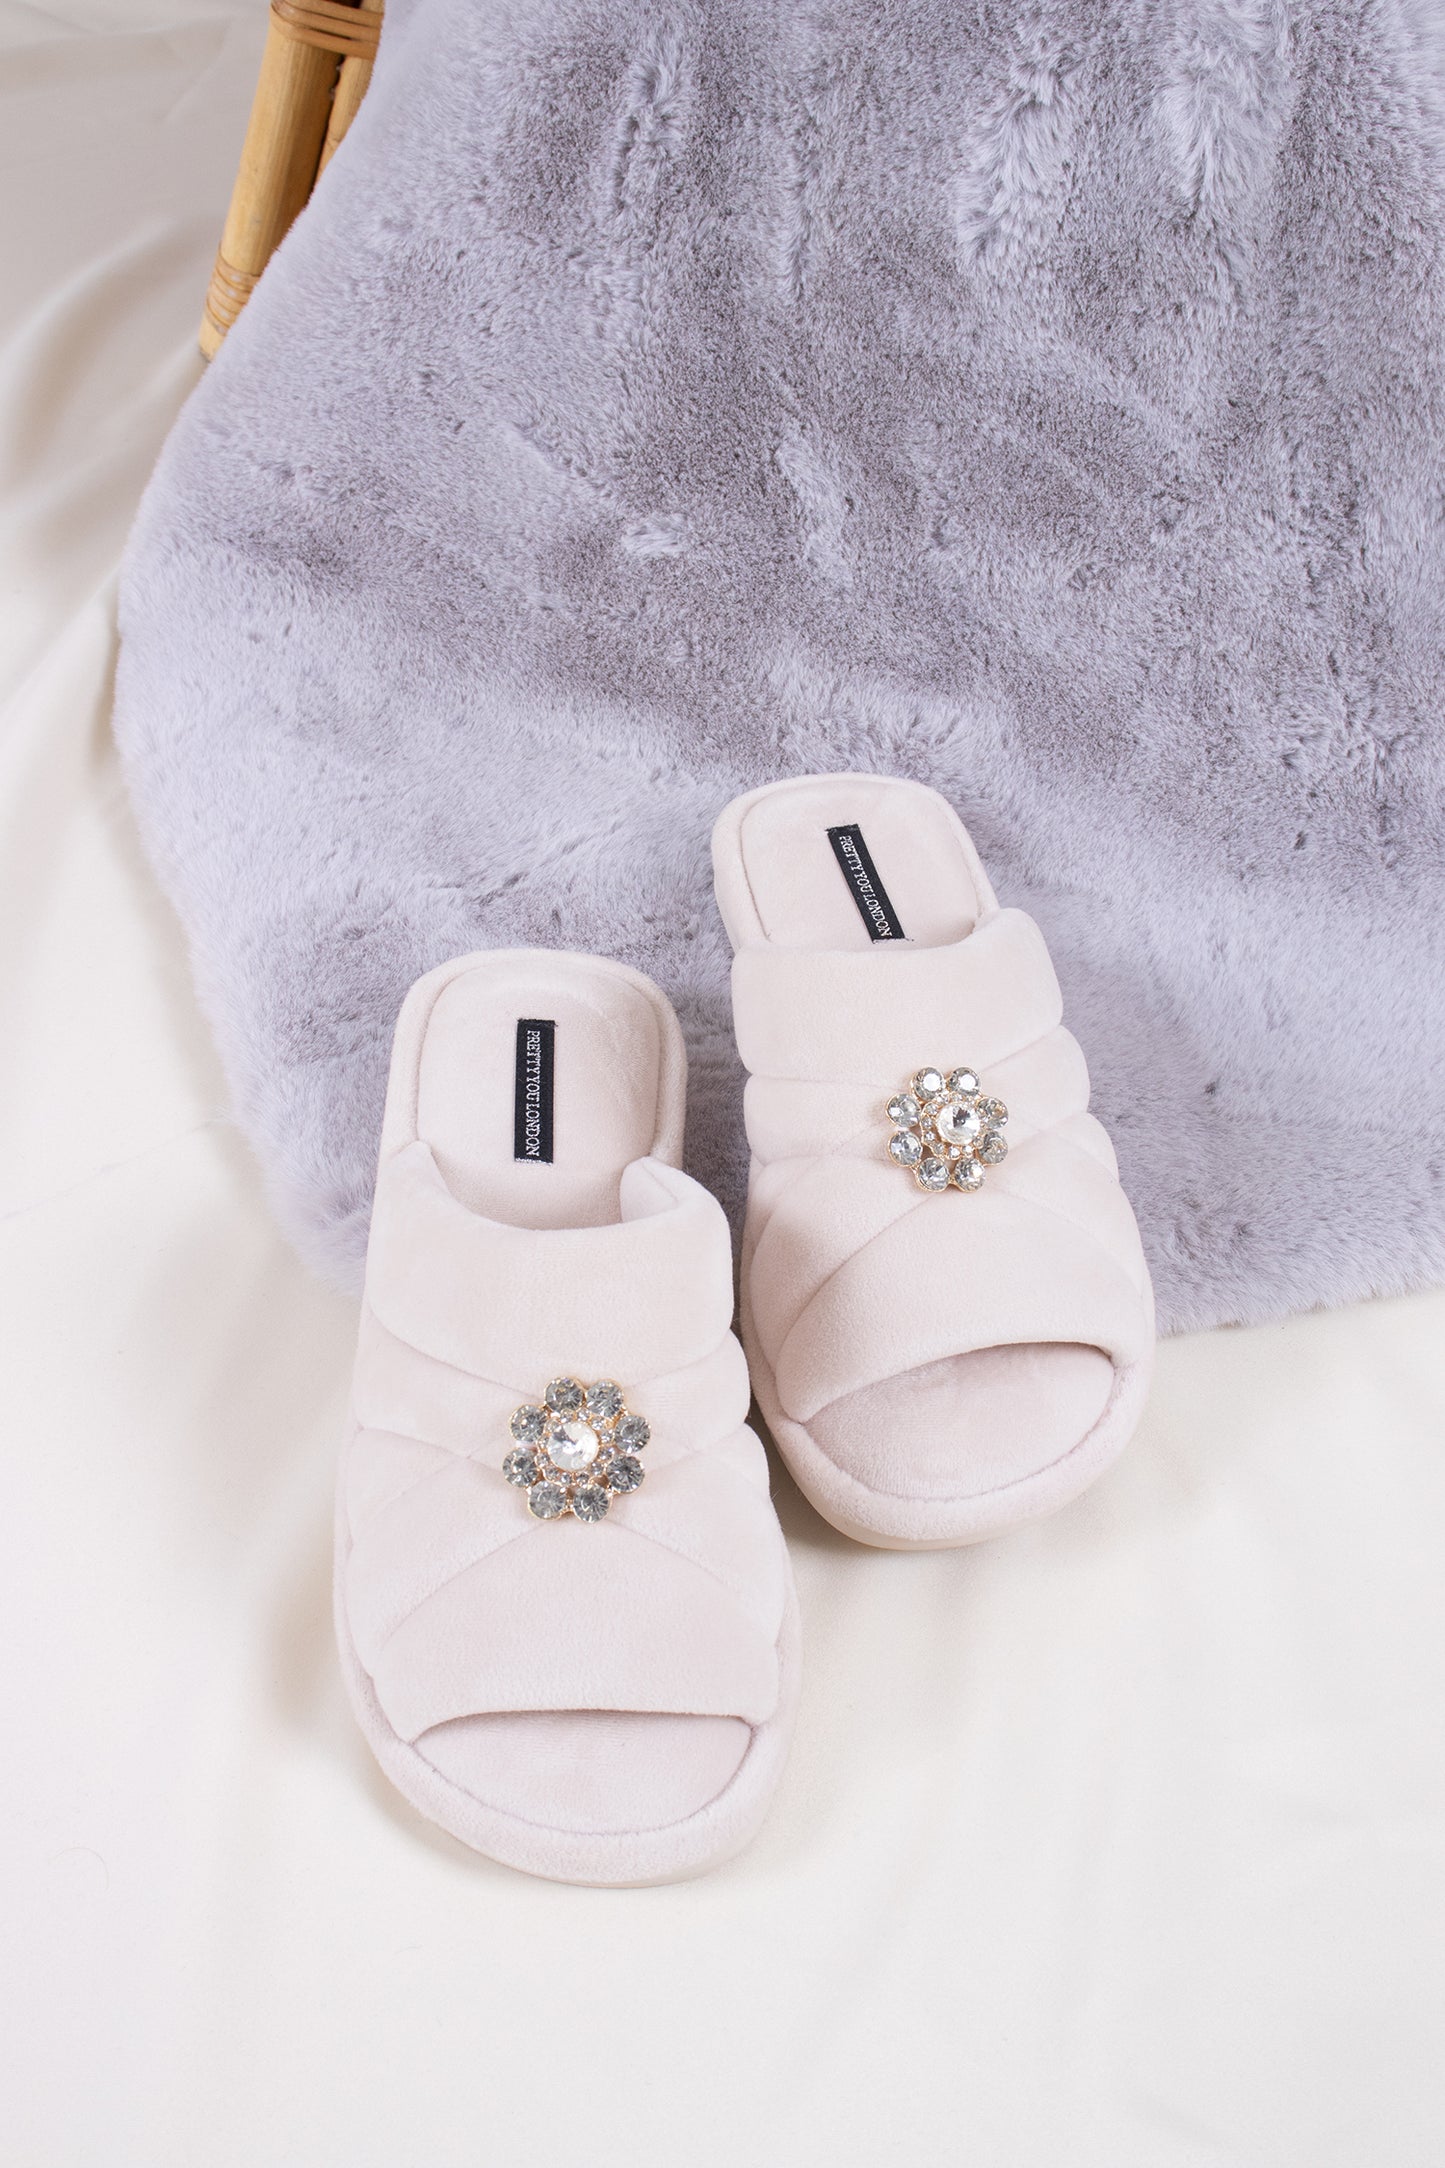 Faye women's slider slippers in powder puff pink combining brushed microfibre materials and a glimmering crystal brooch from Pretty You London